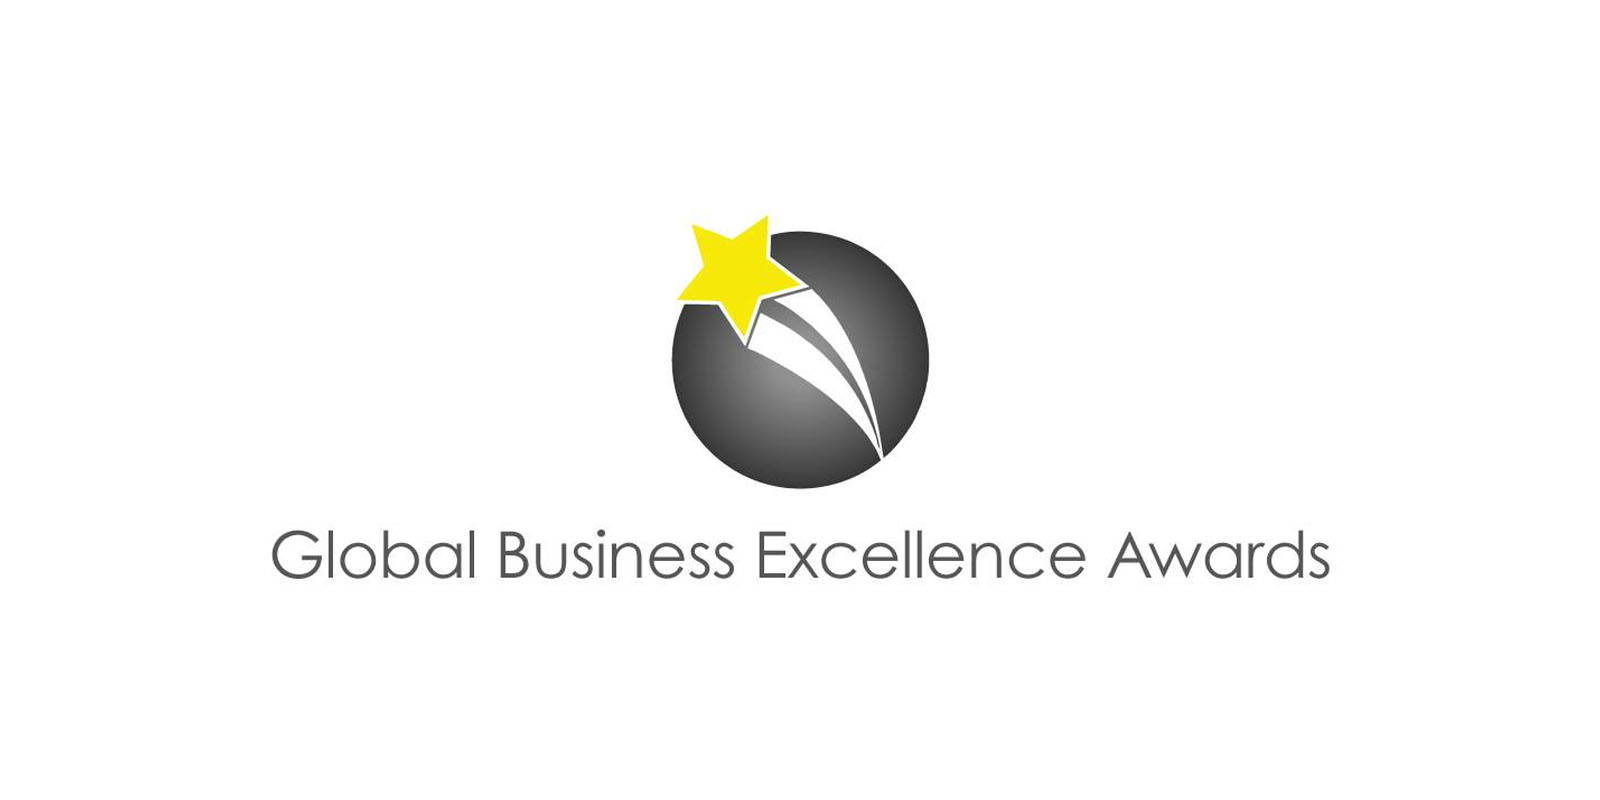 Reggie® Education wins a Global Business Excellence Award for Outstanding Educational Service